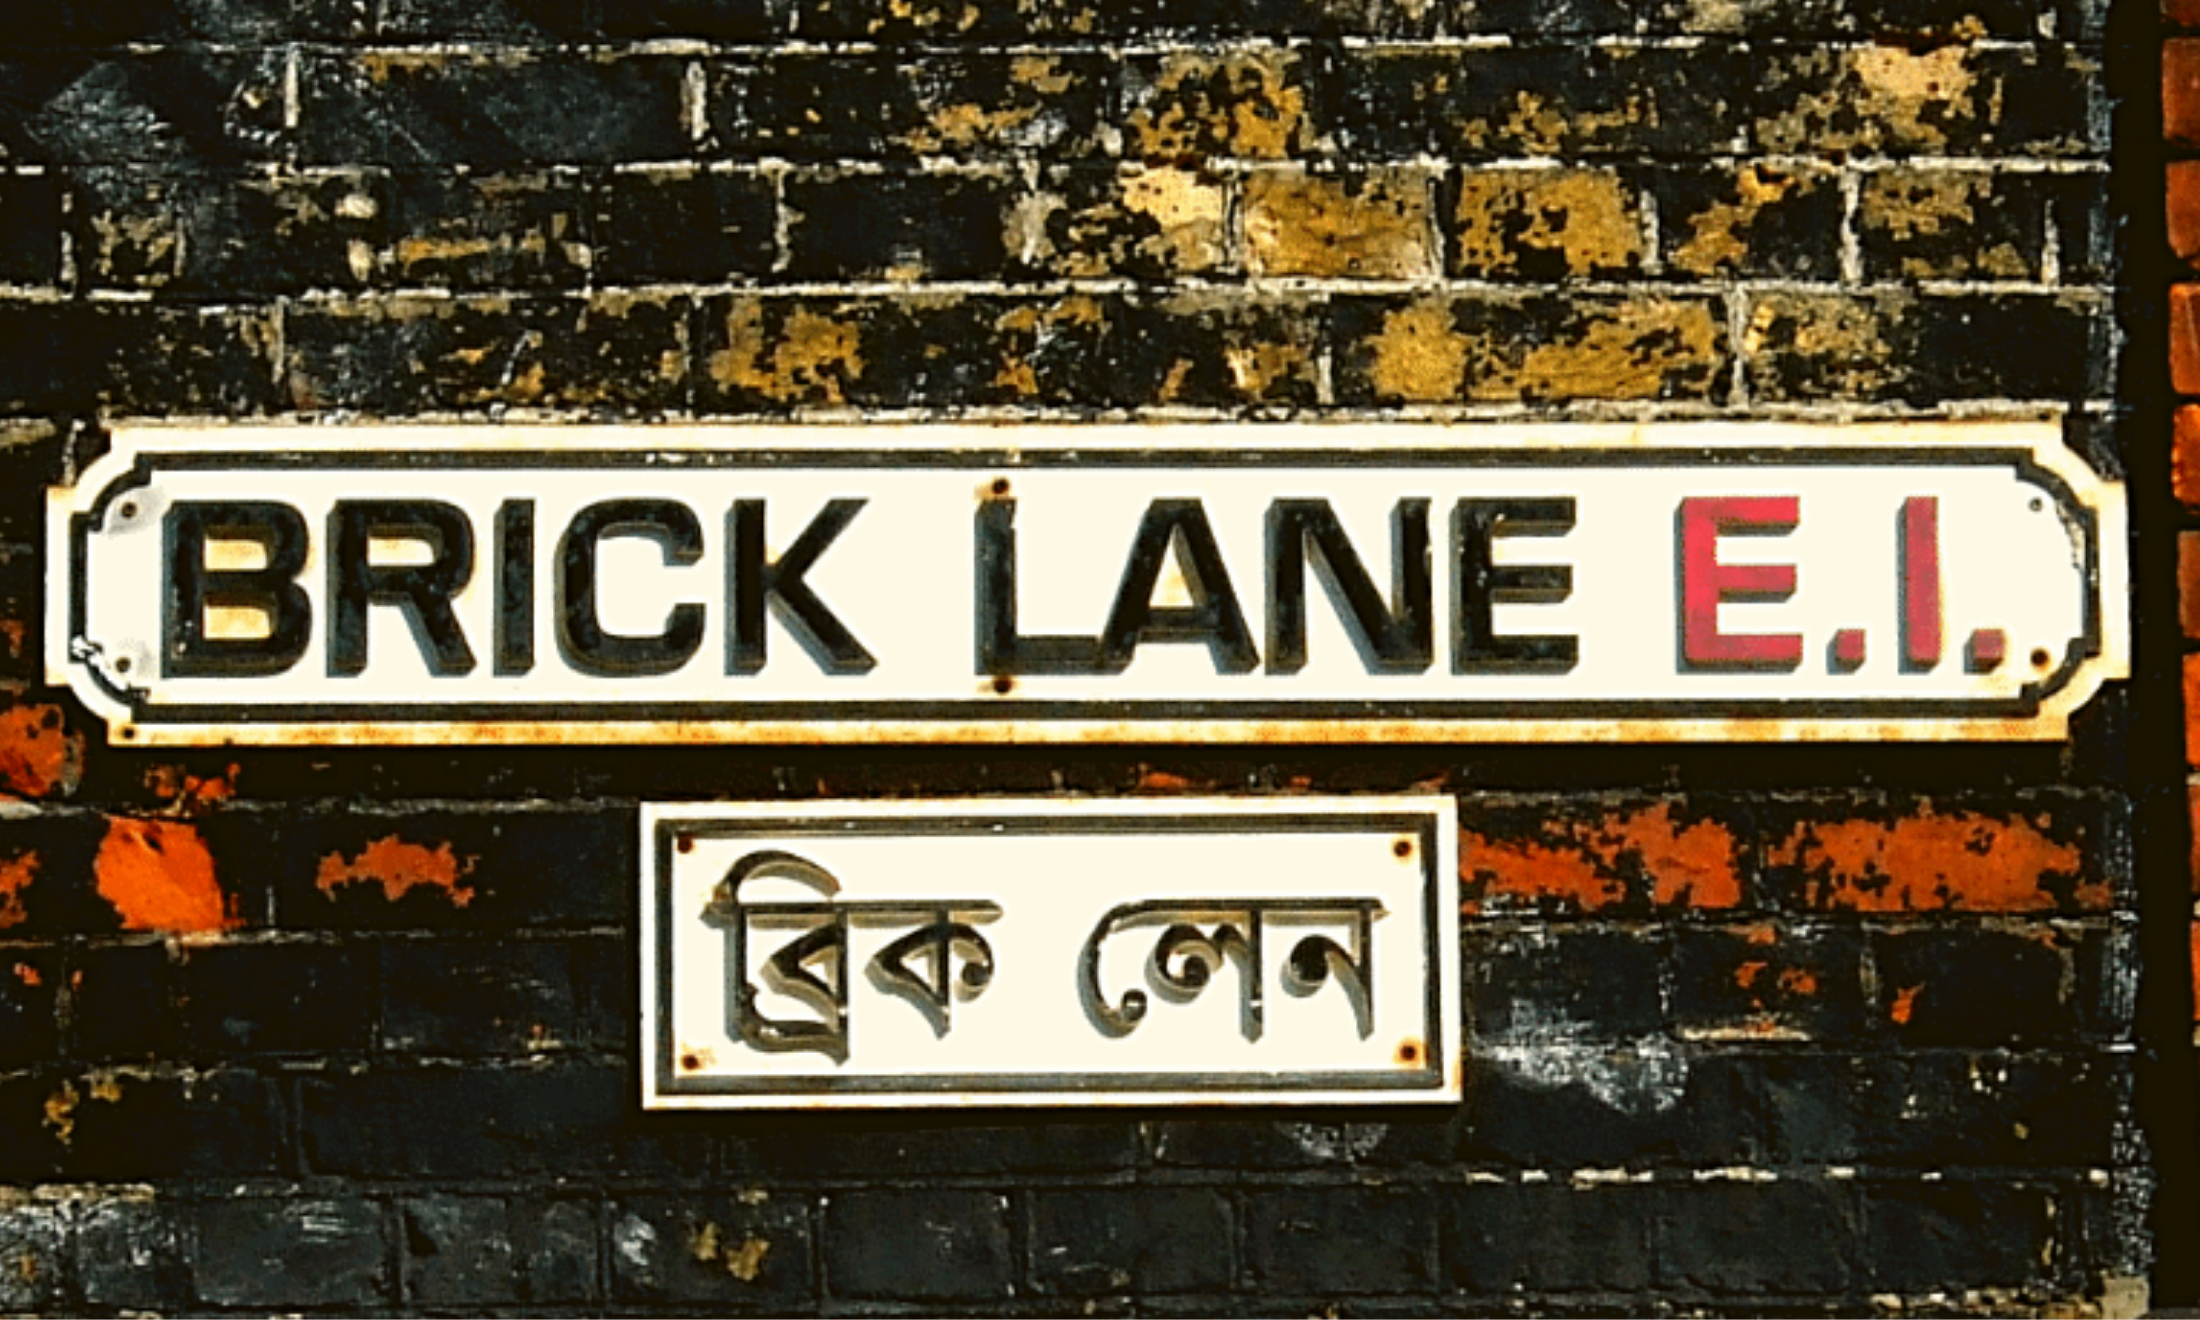 #SaveBrickLane: Why East London’s historic Bangladeshi communities are under attack